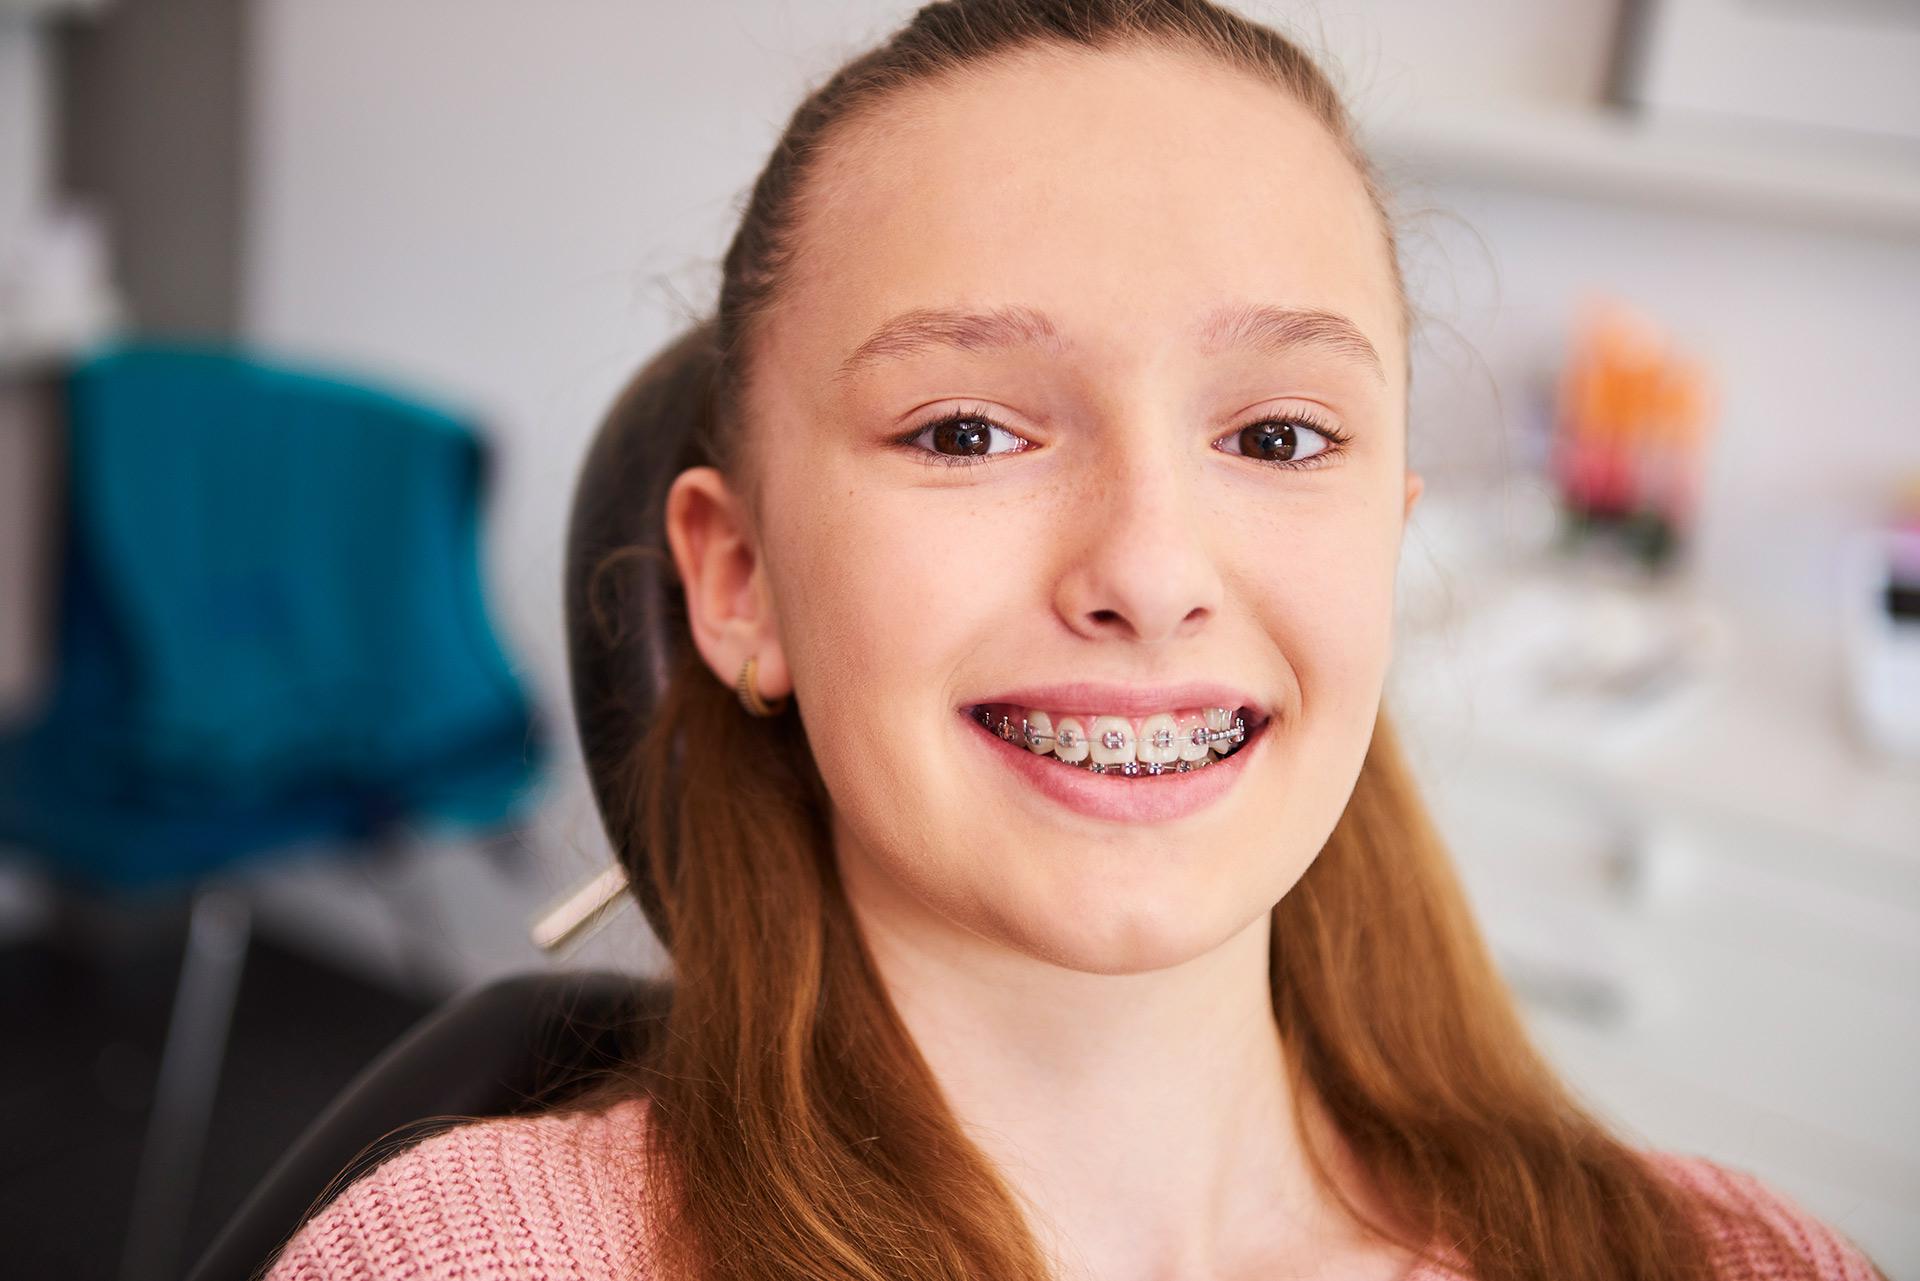 Young girl from Los Angeles at an appointment for her braces